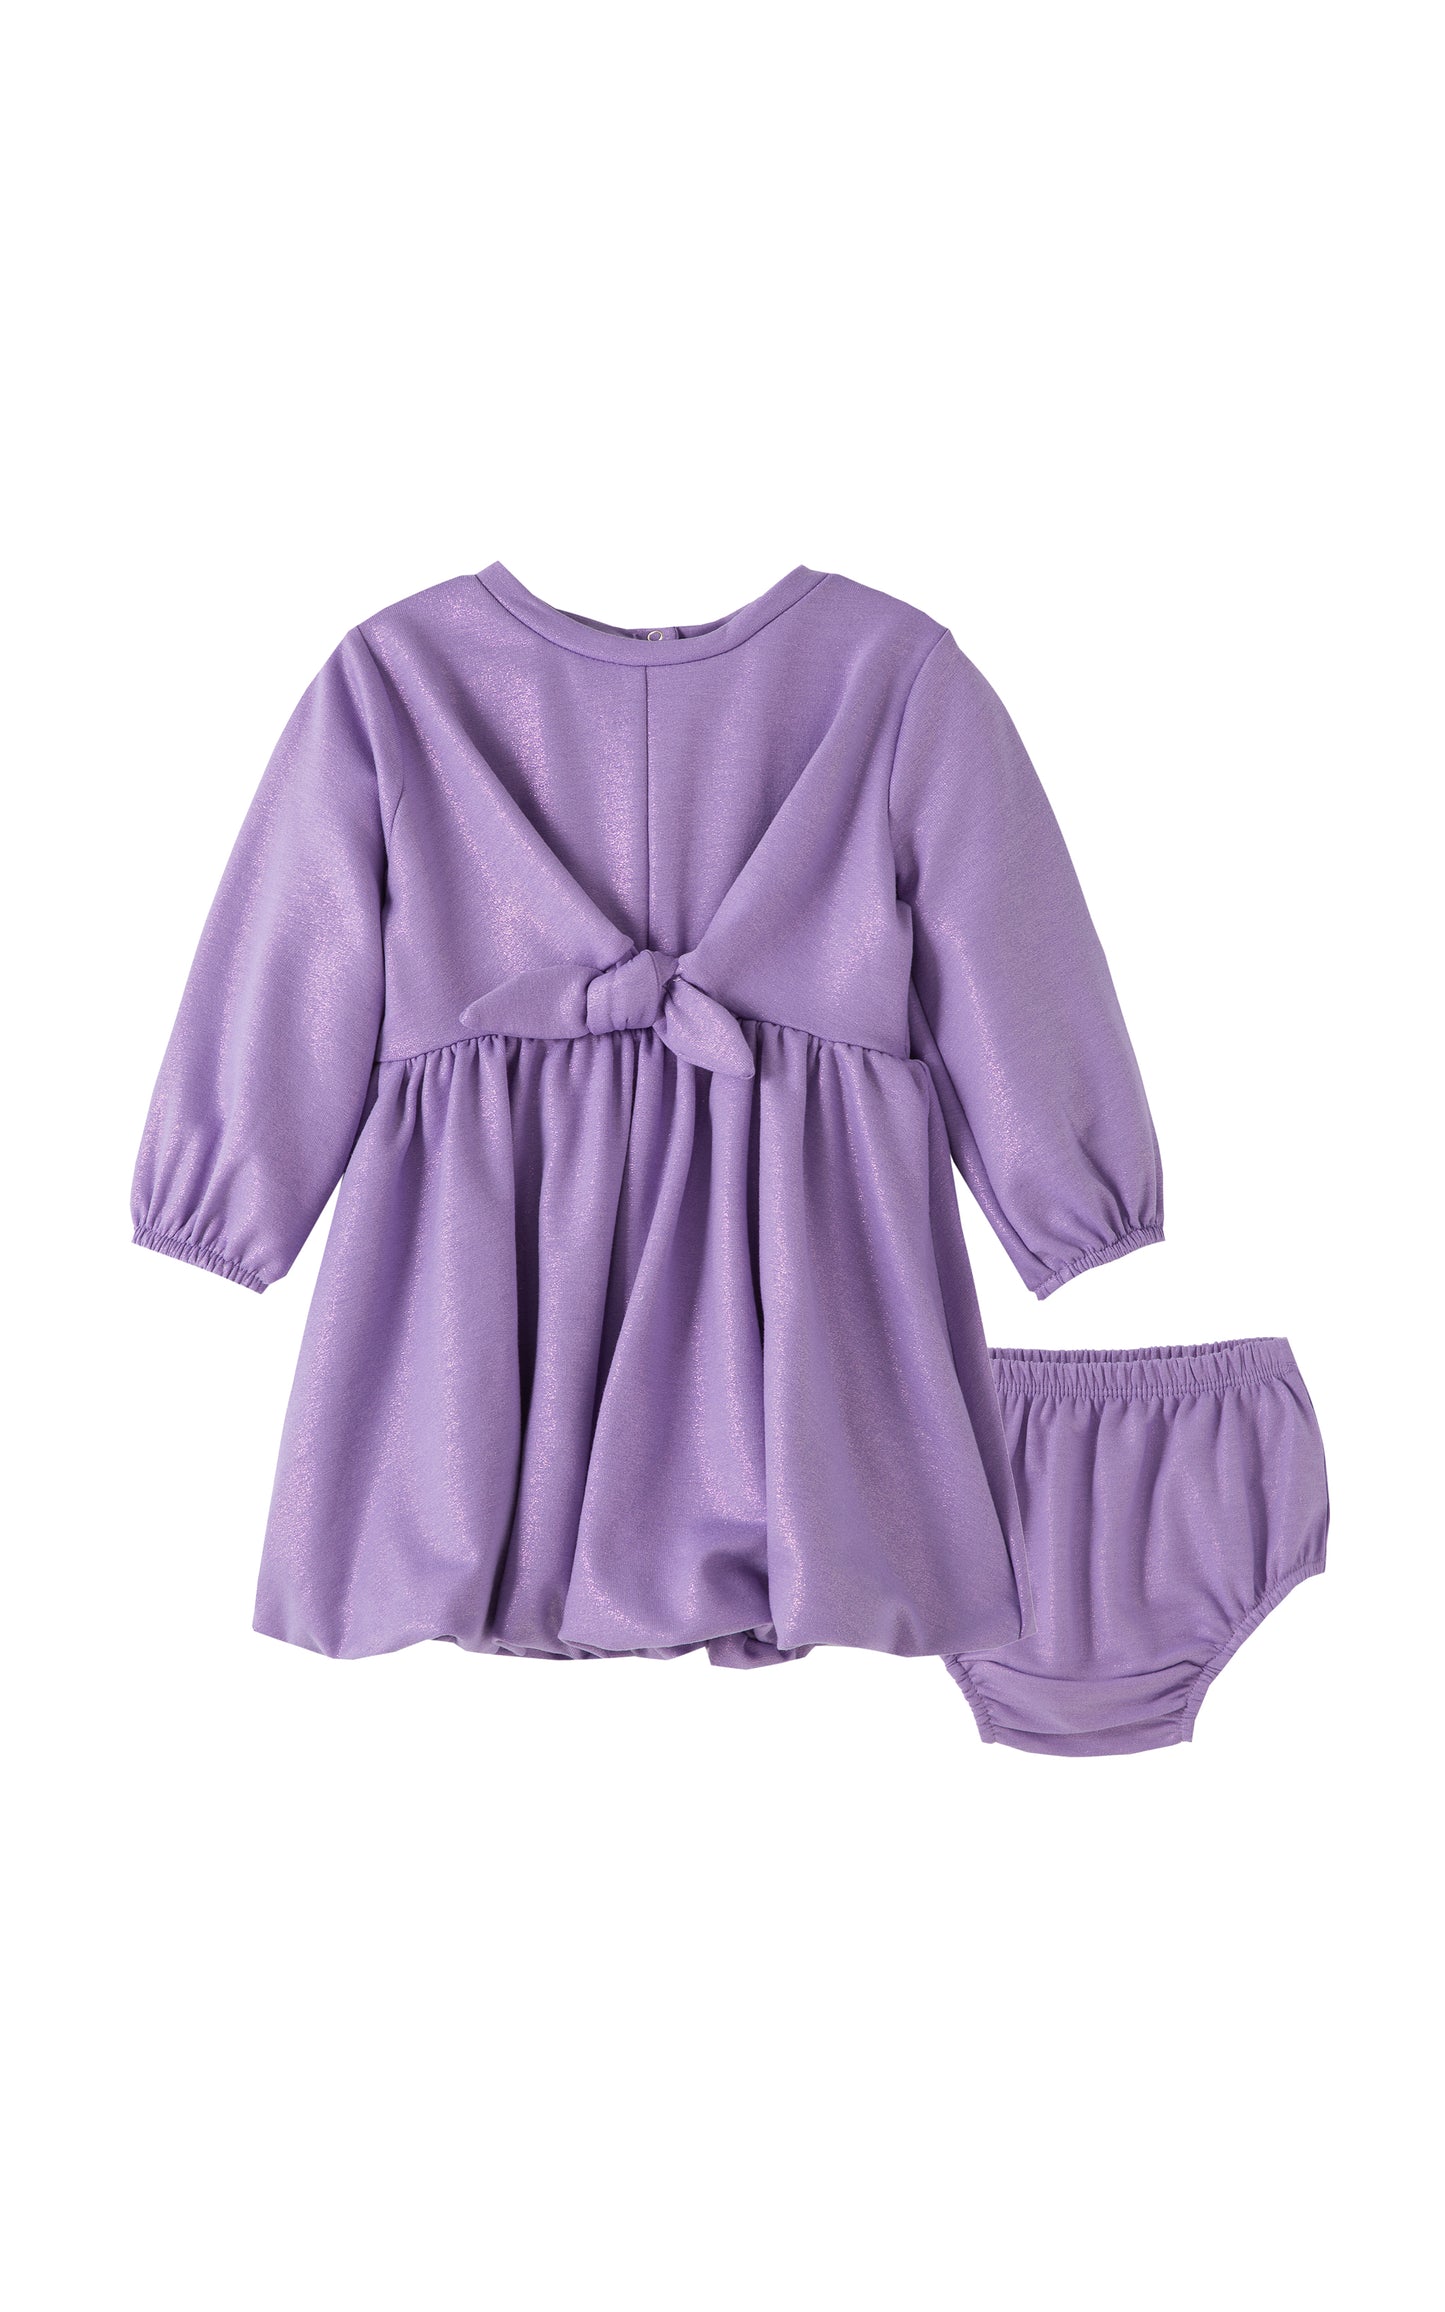 METALLIC PURPLE BUBBLE DRESS WITH BOW AND MATCHING BLOOMERS